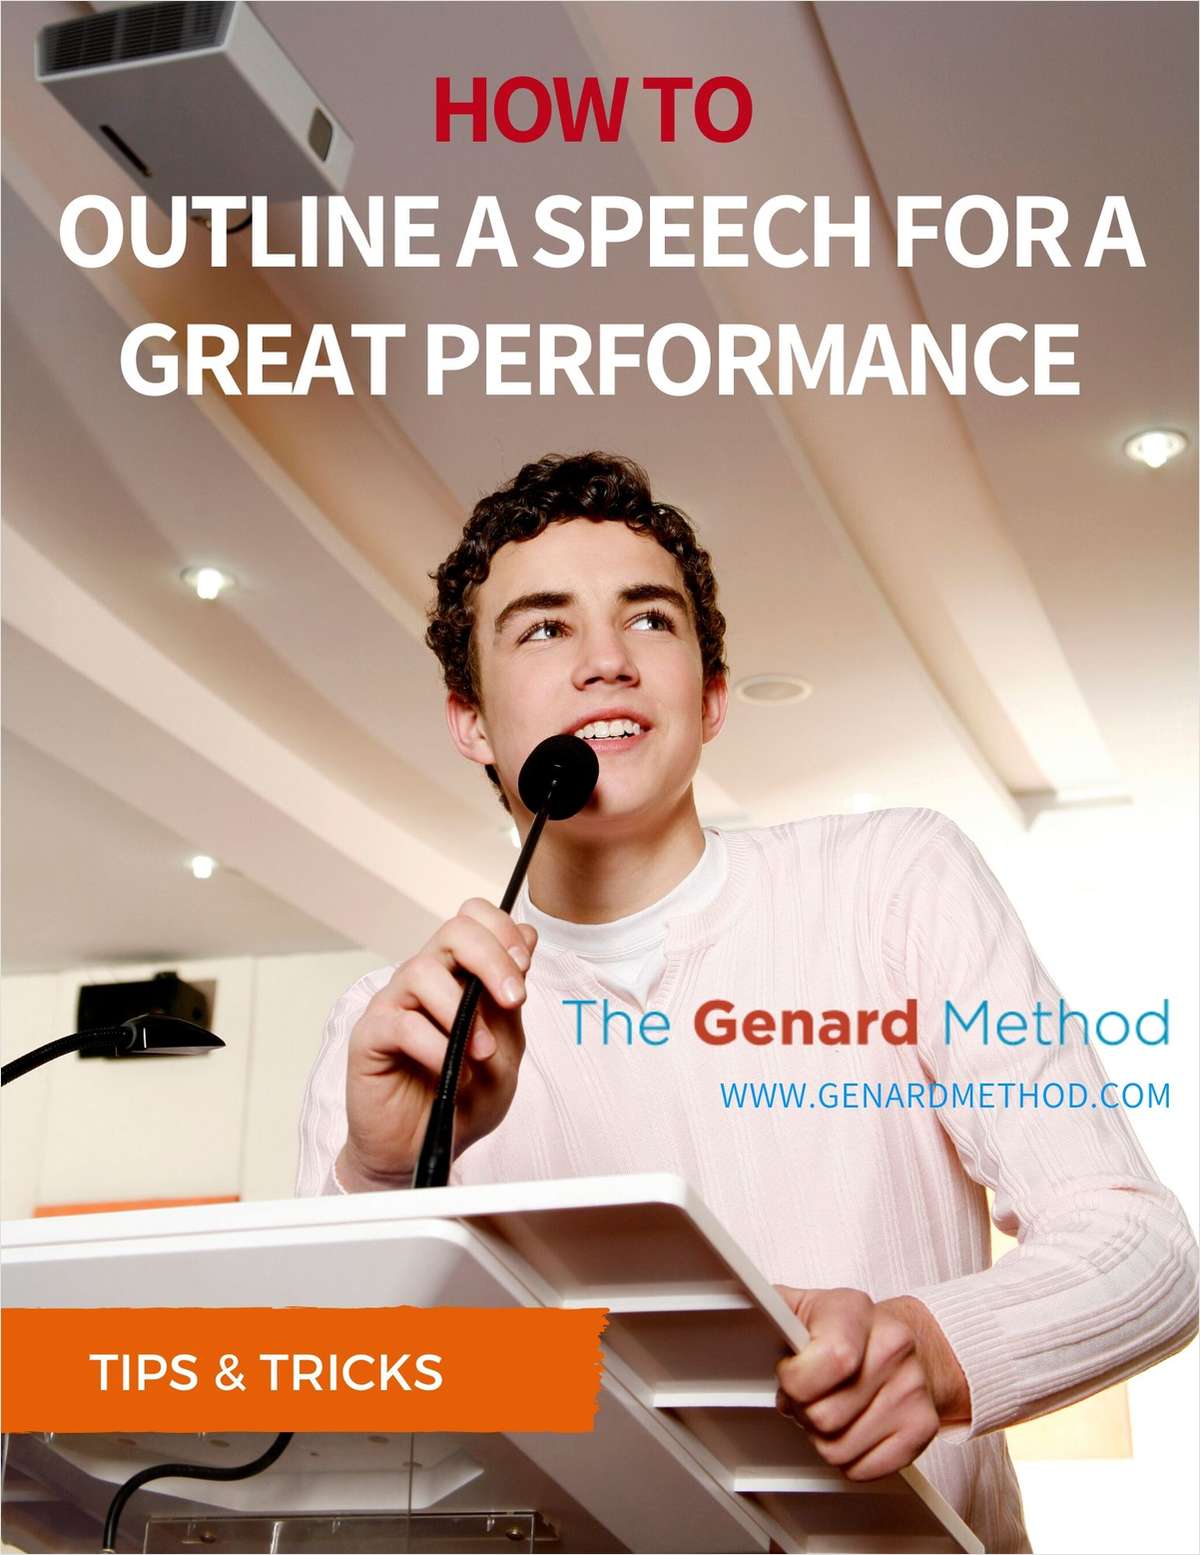 w thab70c8 - How to Outline a Speech for a Great Performance